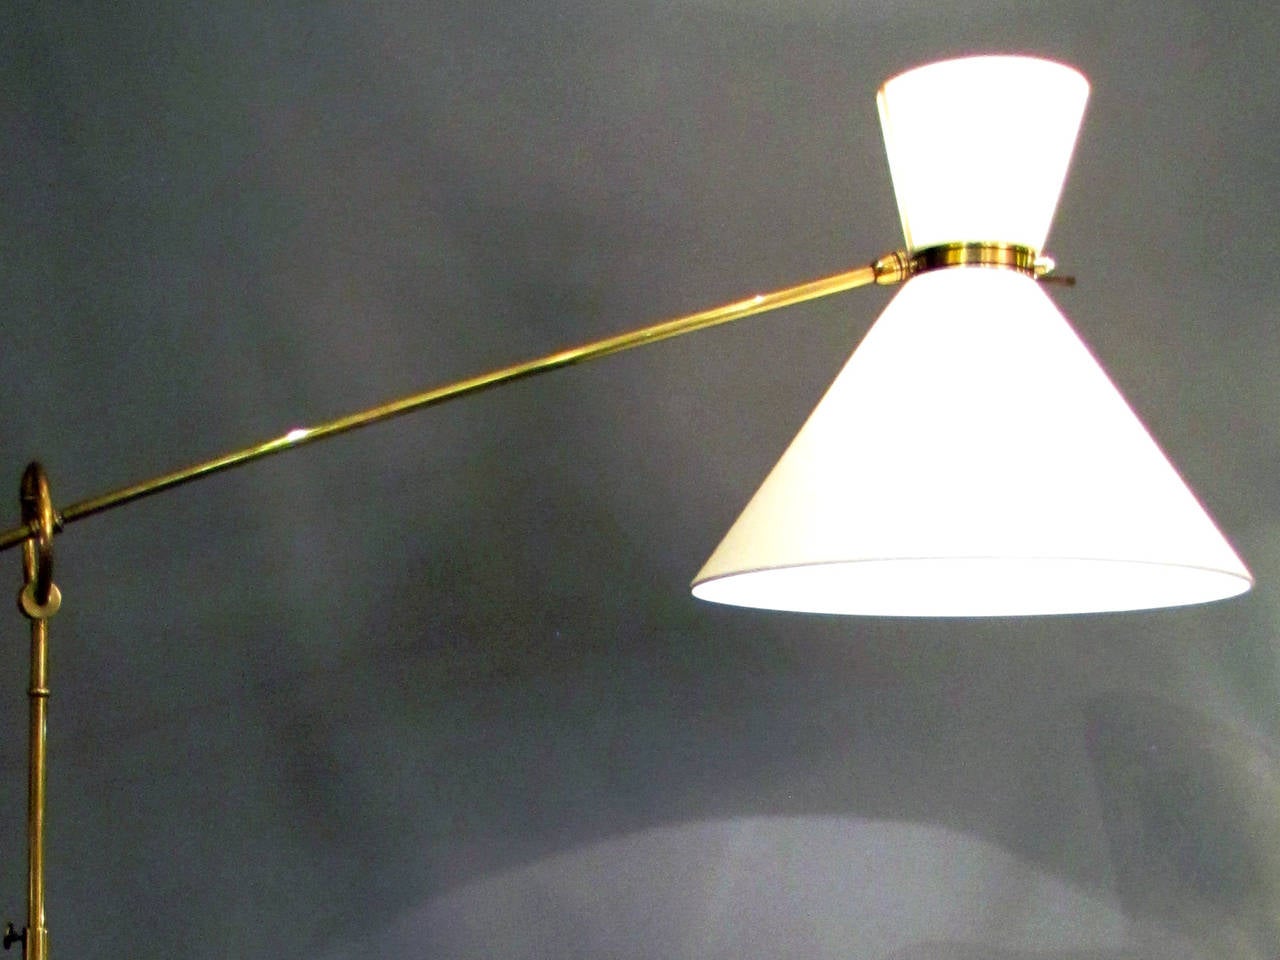 Floor lamp with swivel arm in polished brass.
Circular base where stands one adjustable rod receiving a swivel arm. Orientable conical lampshades in off-white fabric.

Heigth of the rod: 4 ft. 9.09 in to 6 ft. 2.8 in.
Length of the arm: 3 ft.